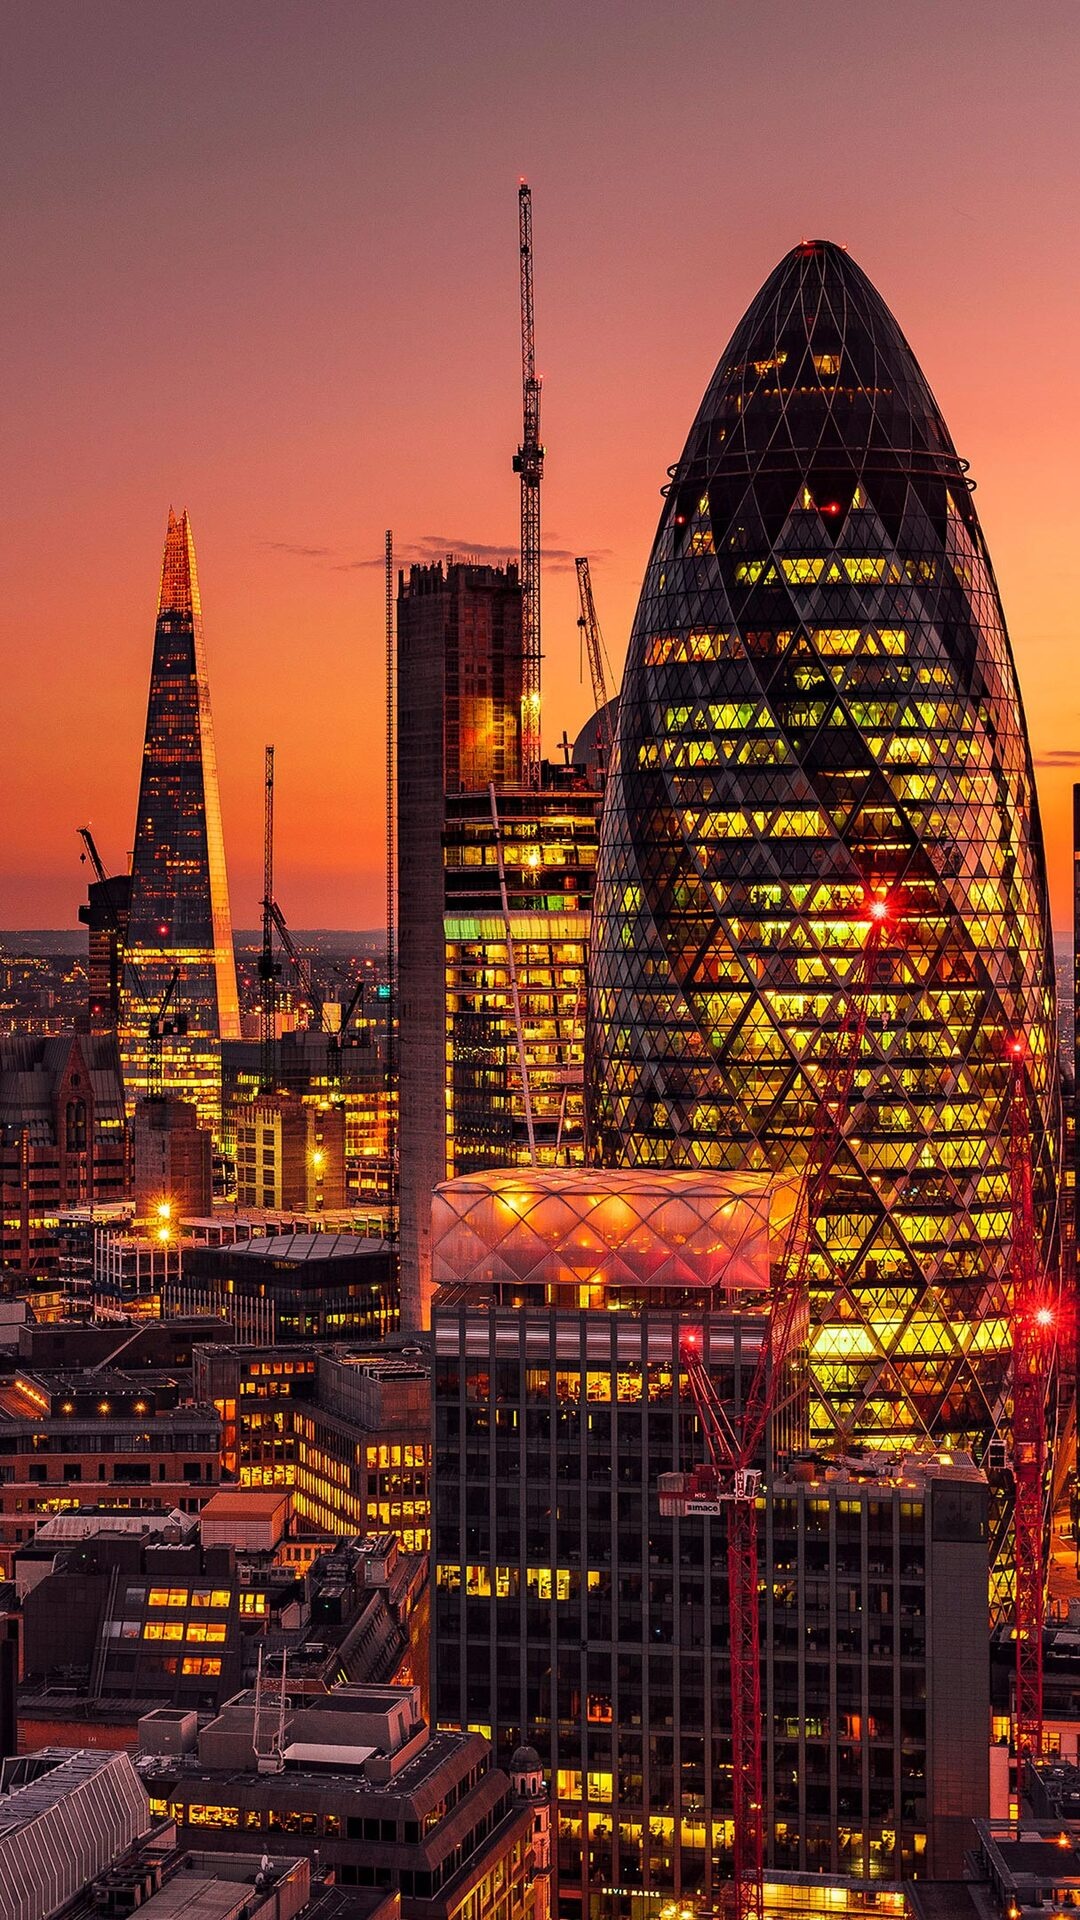 London: 30 St Mary Axe, Sunset, Skyscrapers. 1080x1920 Full HD Wallpaper.